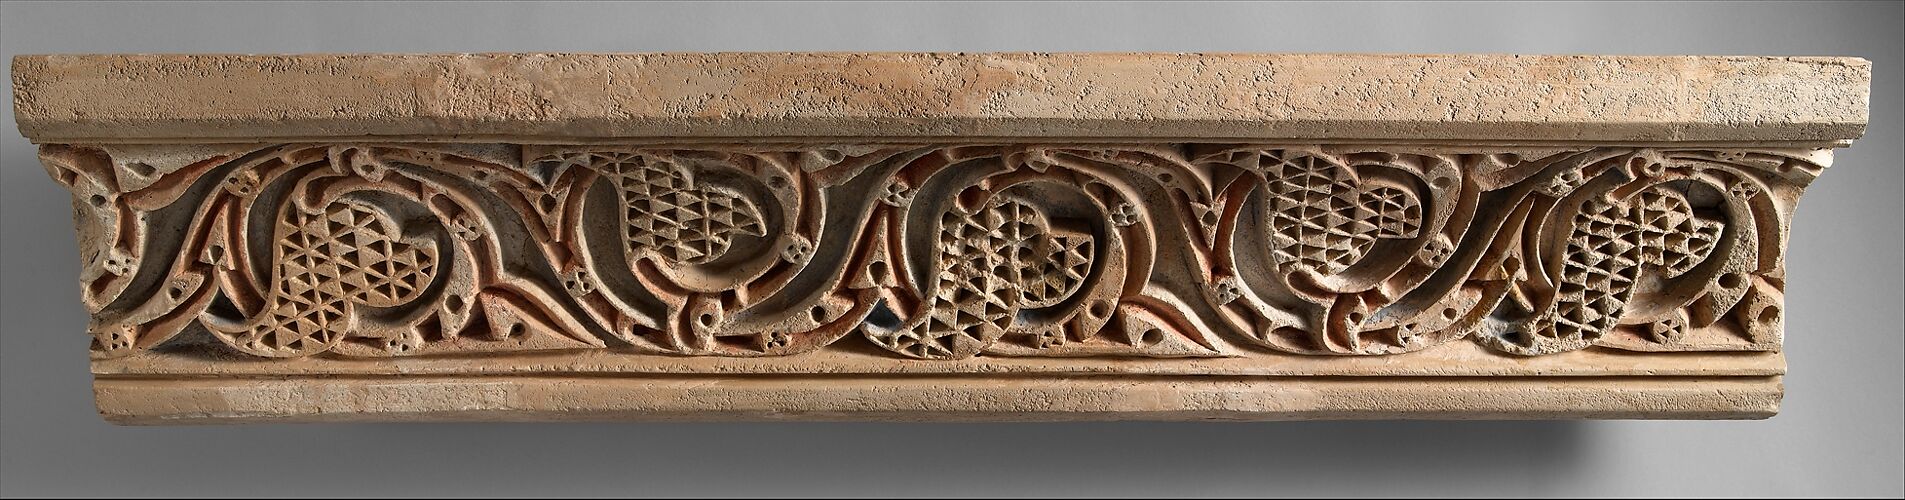 Fragment of a Painted Cornice Panel with Scrolling Vines